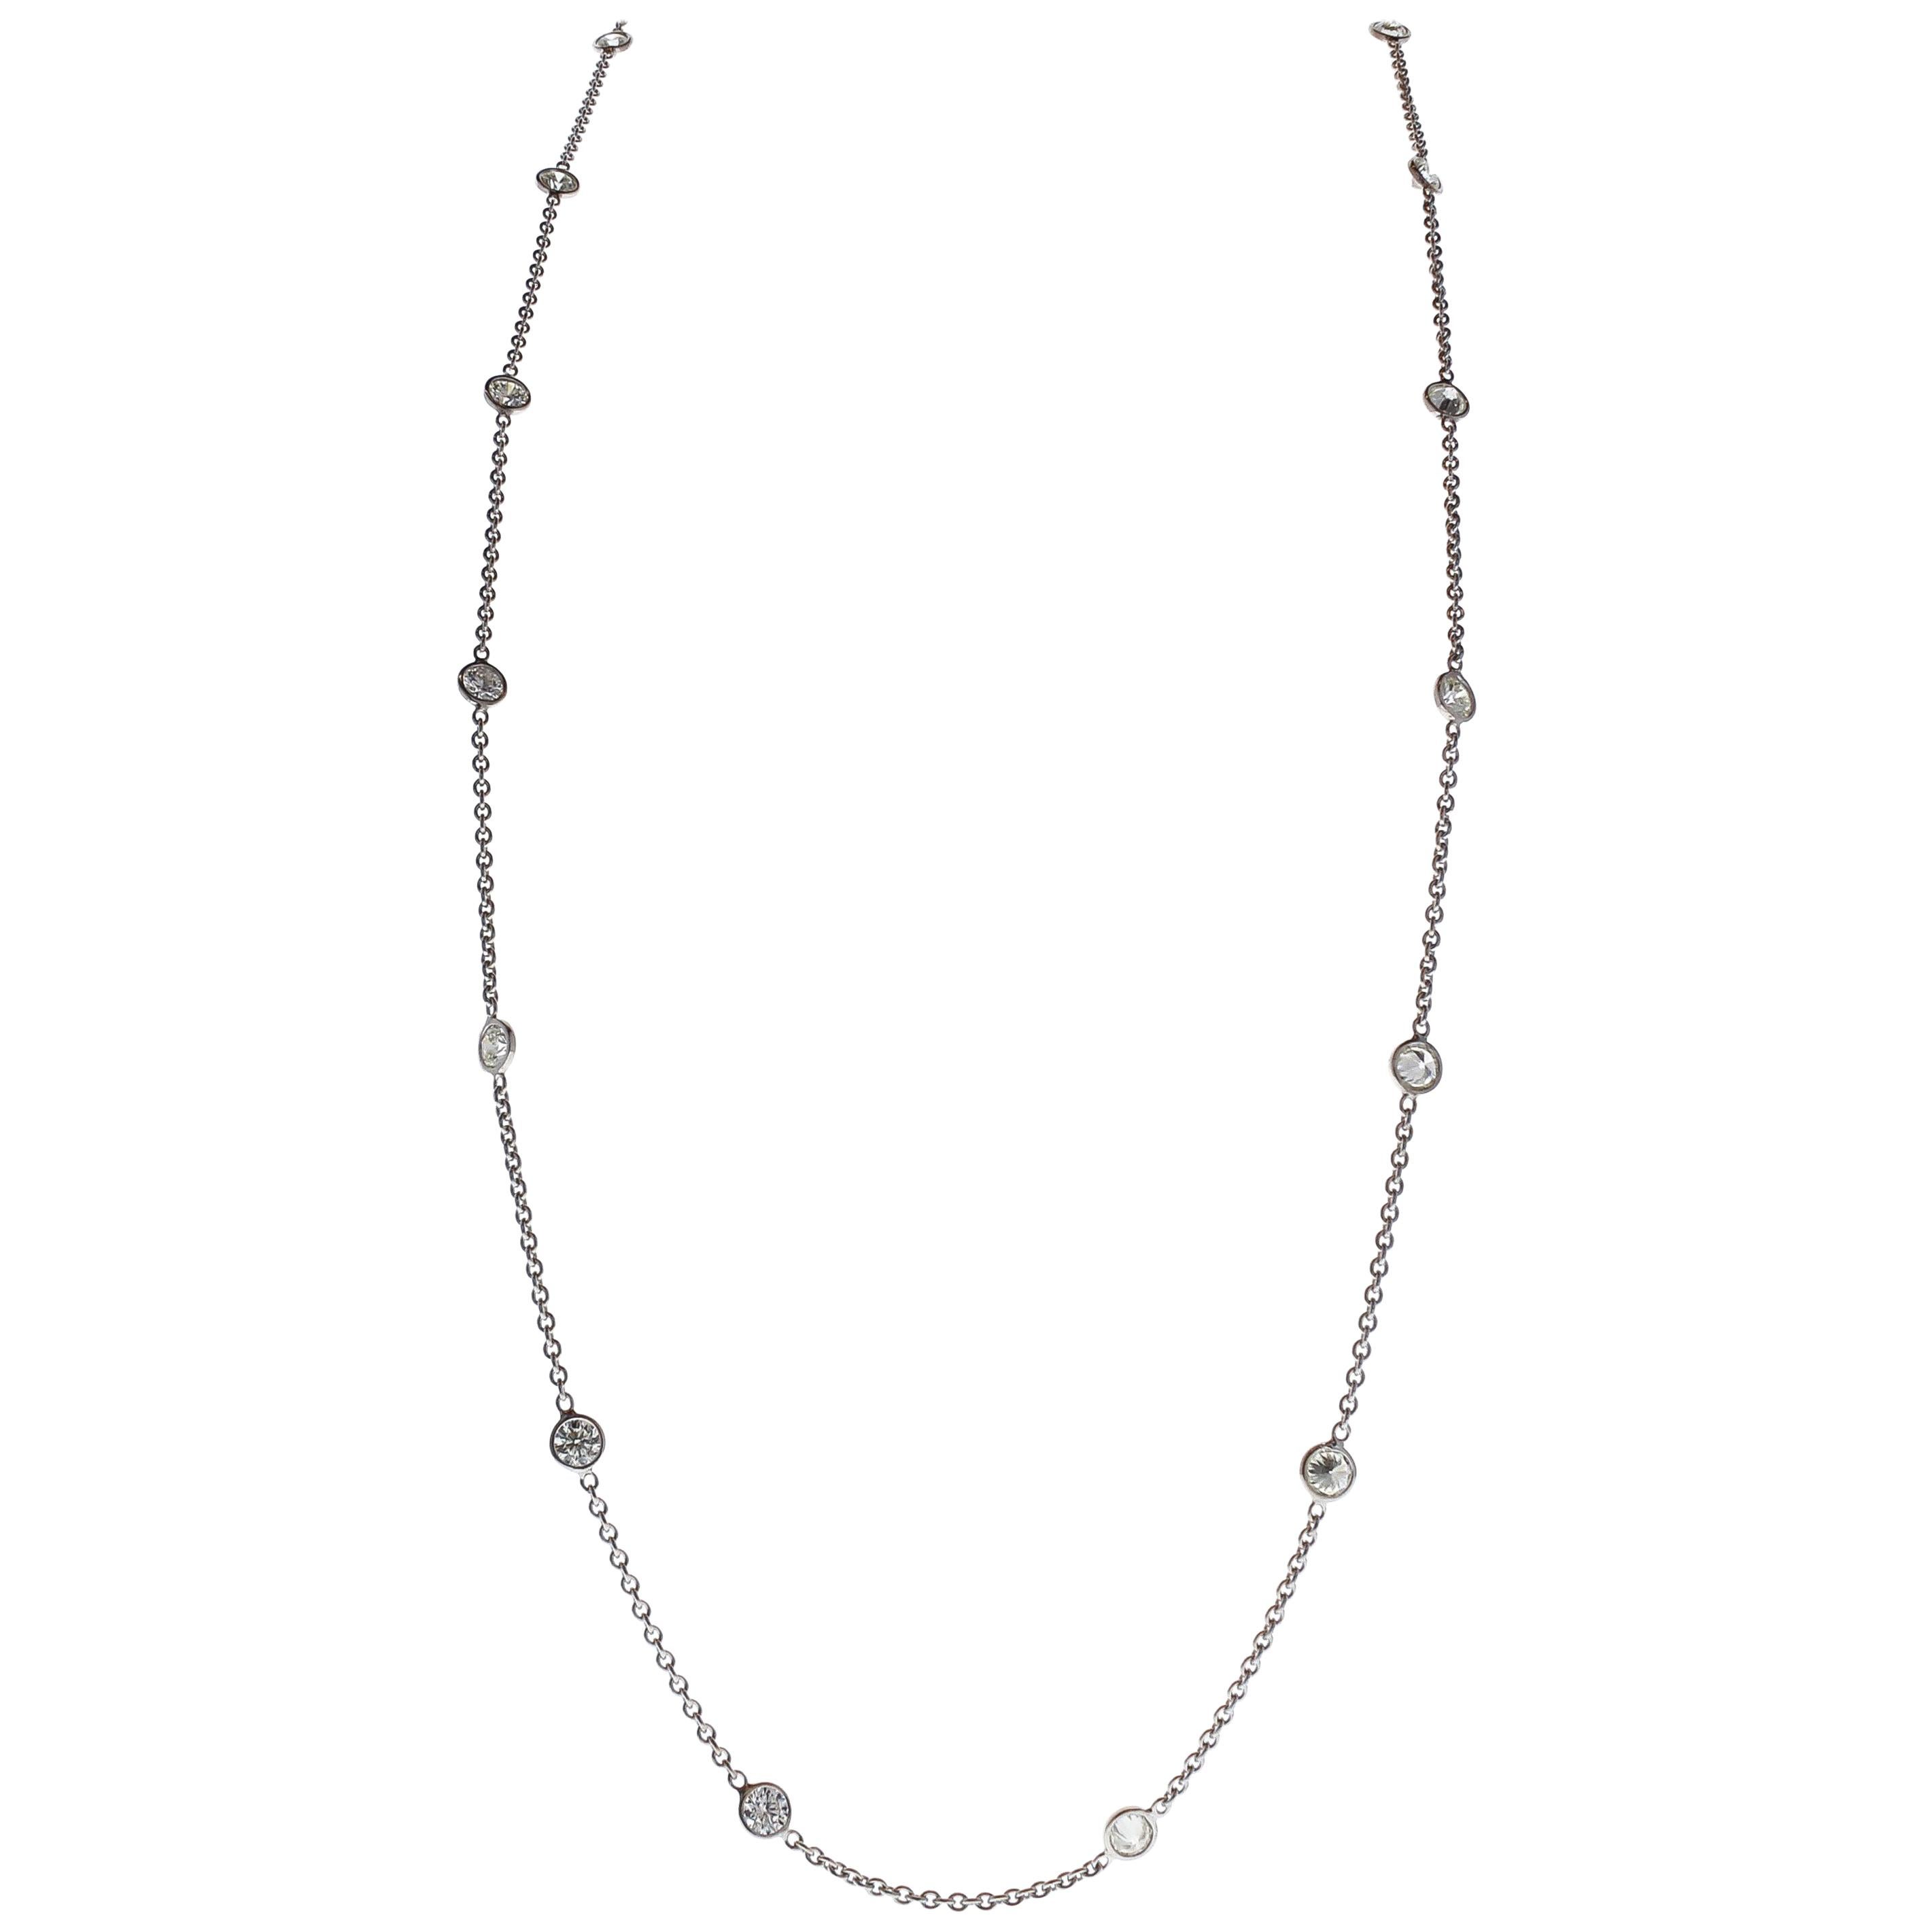 2.81 Carat Total Diamonds by the Yard Necklace in 14 Karat White Gold